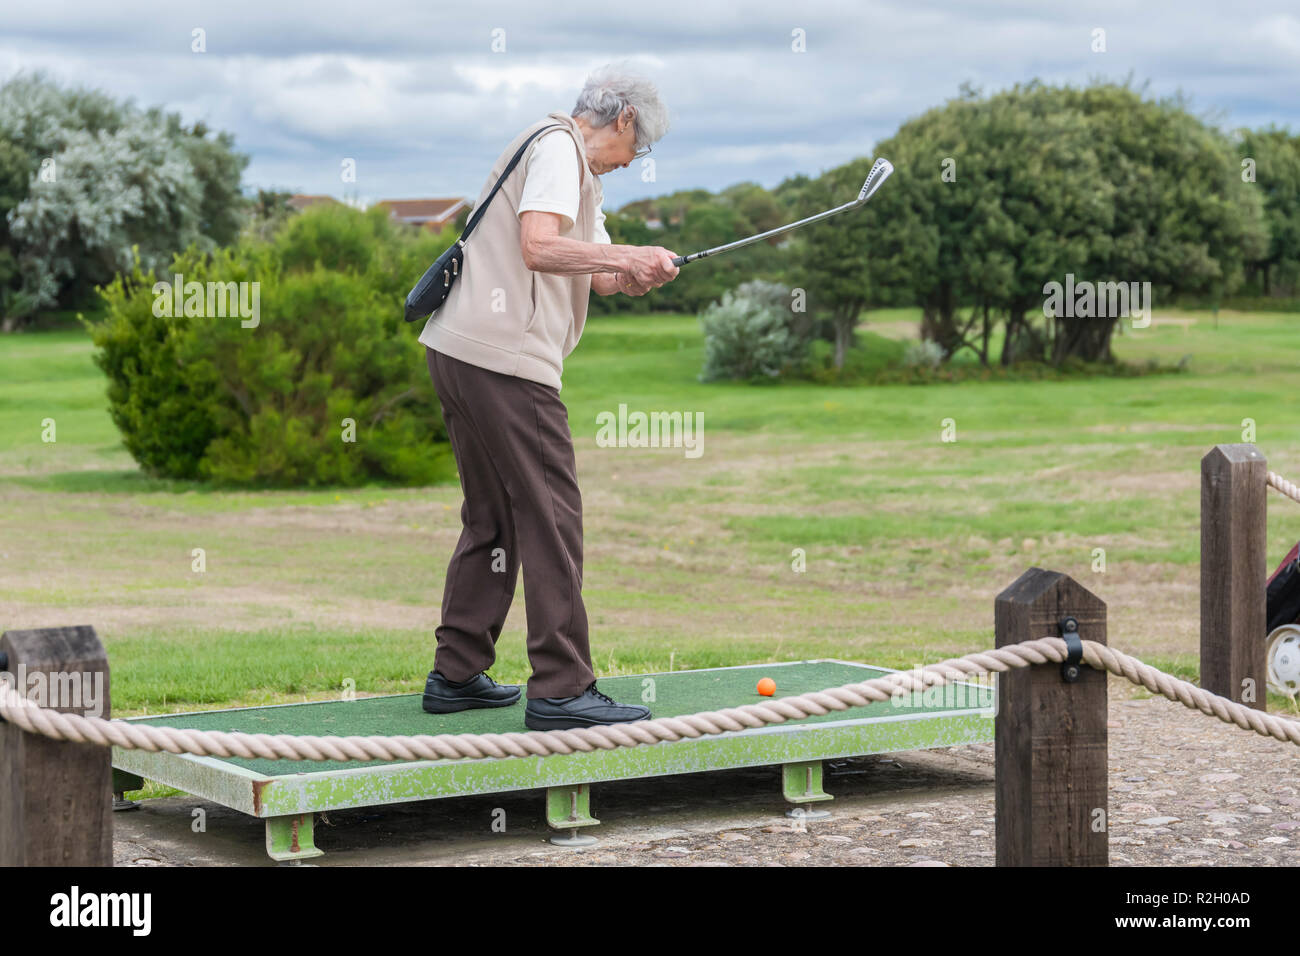 Senior woman swinging a golf club as she plays mini golf on a course in the UK. Elderly lady playing sport. Stock Photo